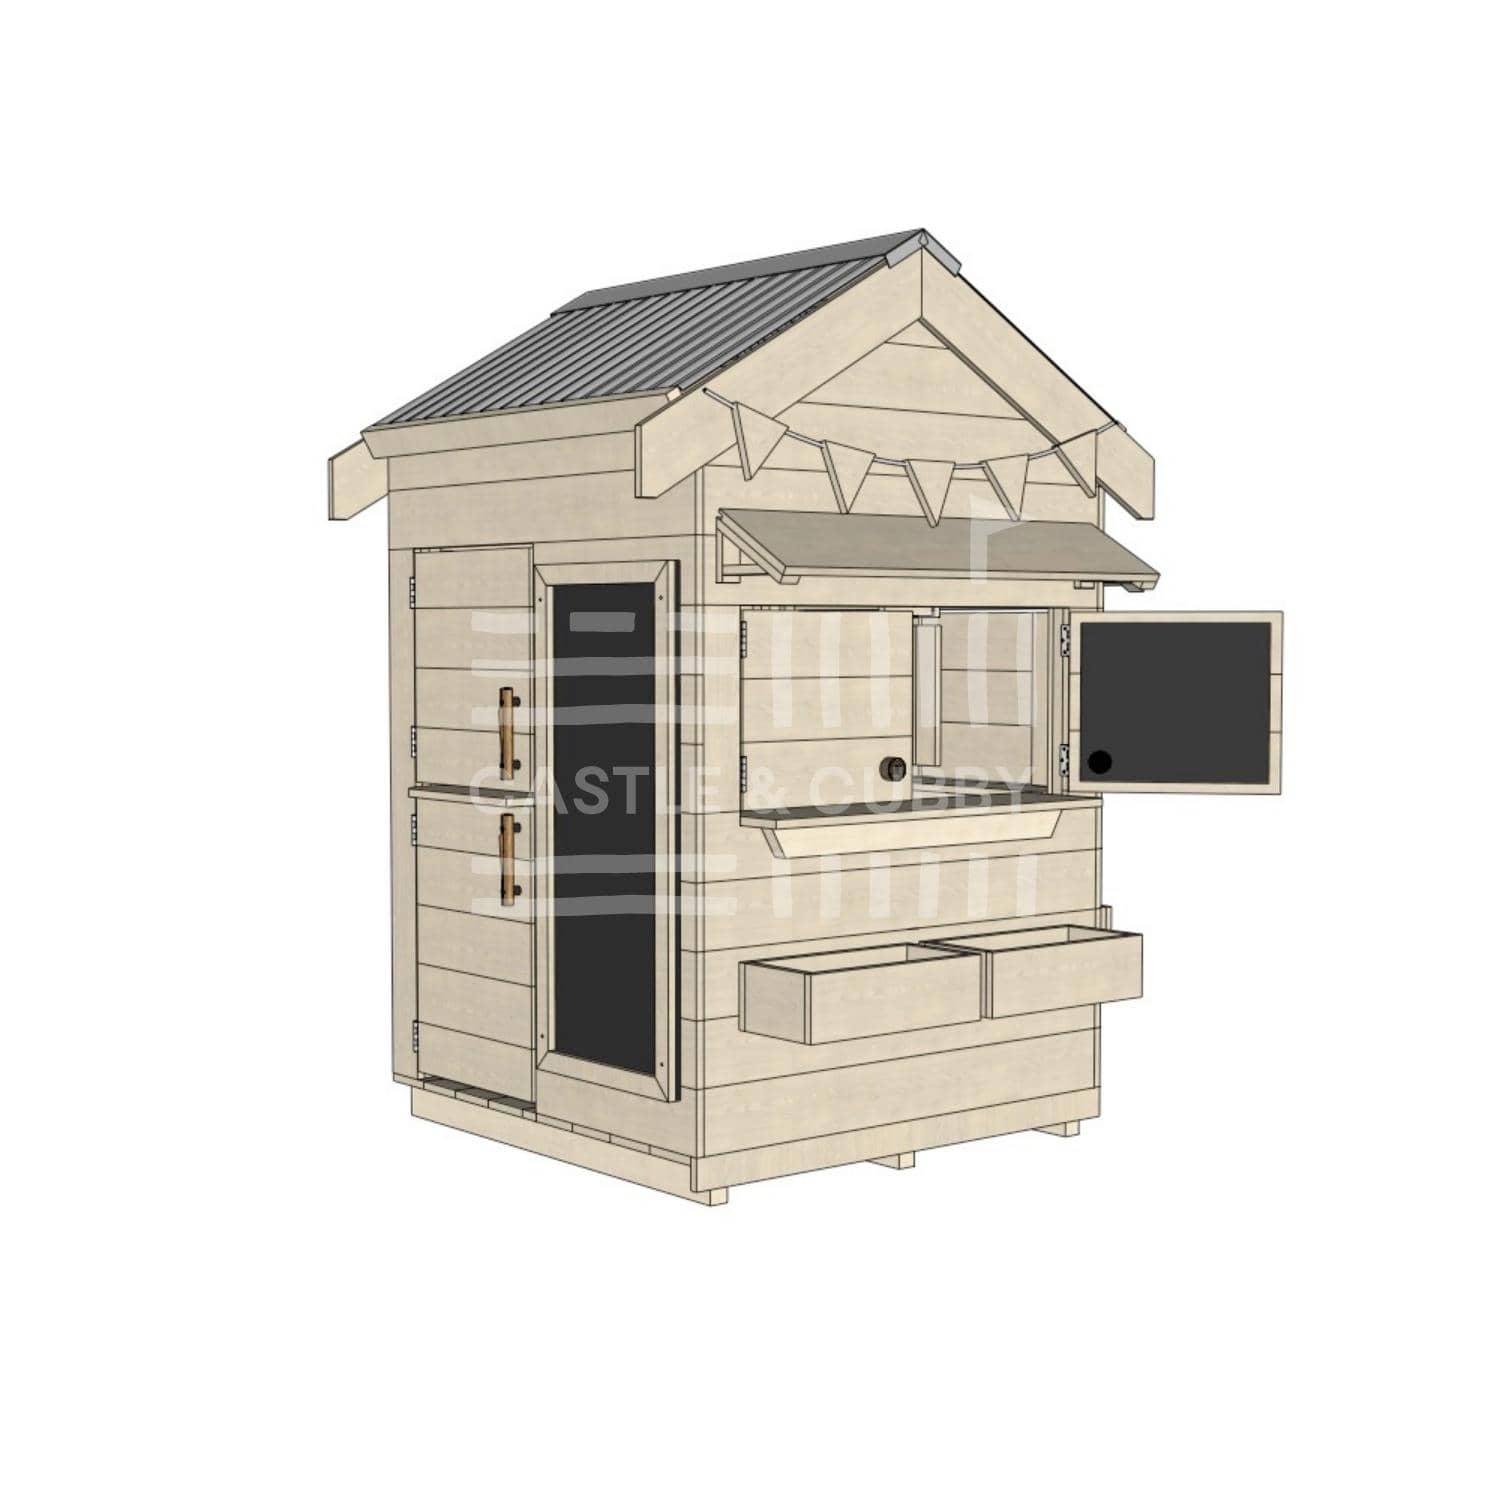 Pitched roof raw wooden cubby house residential and family homes little square accessories